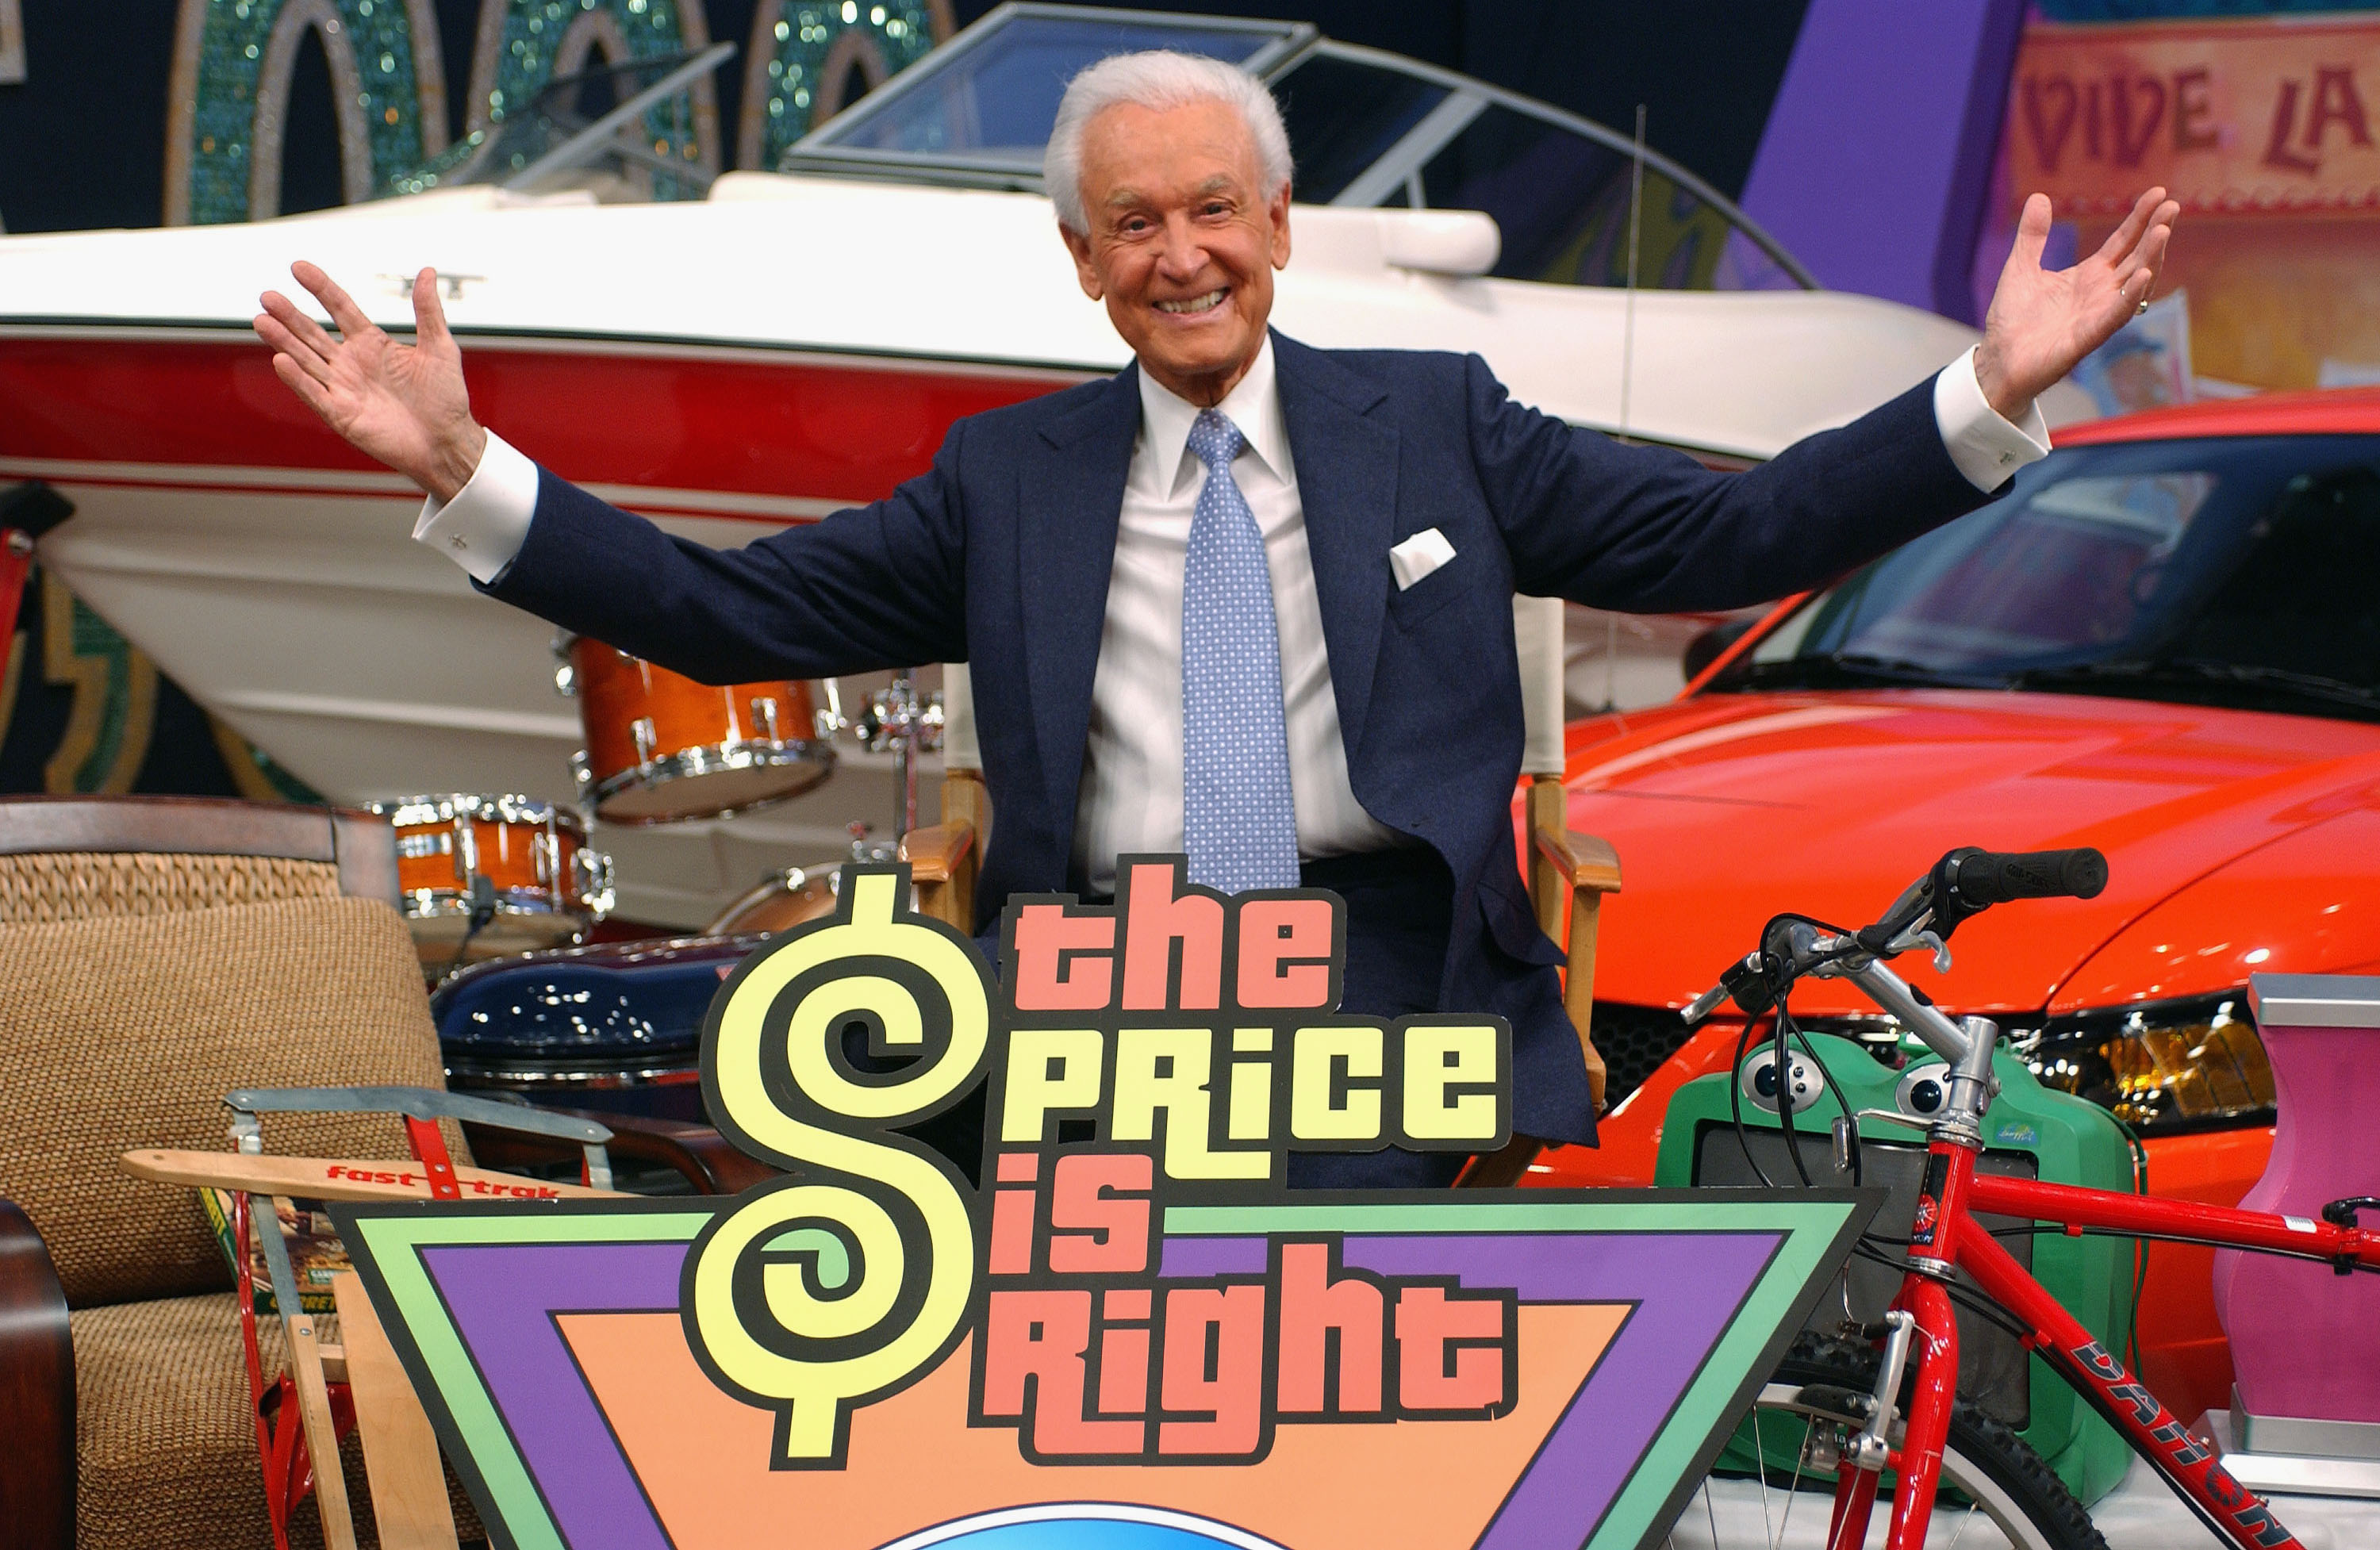 Bob Barker during the taping of the 6000th show of "The Price Is Right" in Los Angeles, 2004 | Source: Getty Images